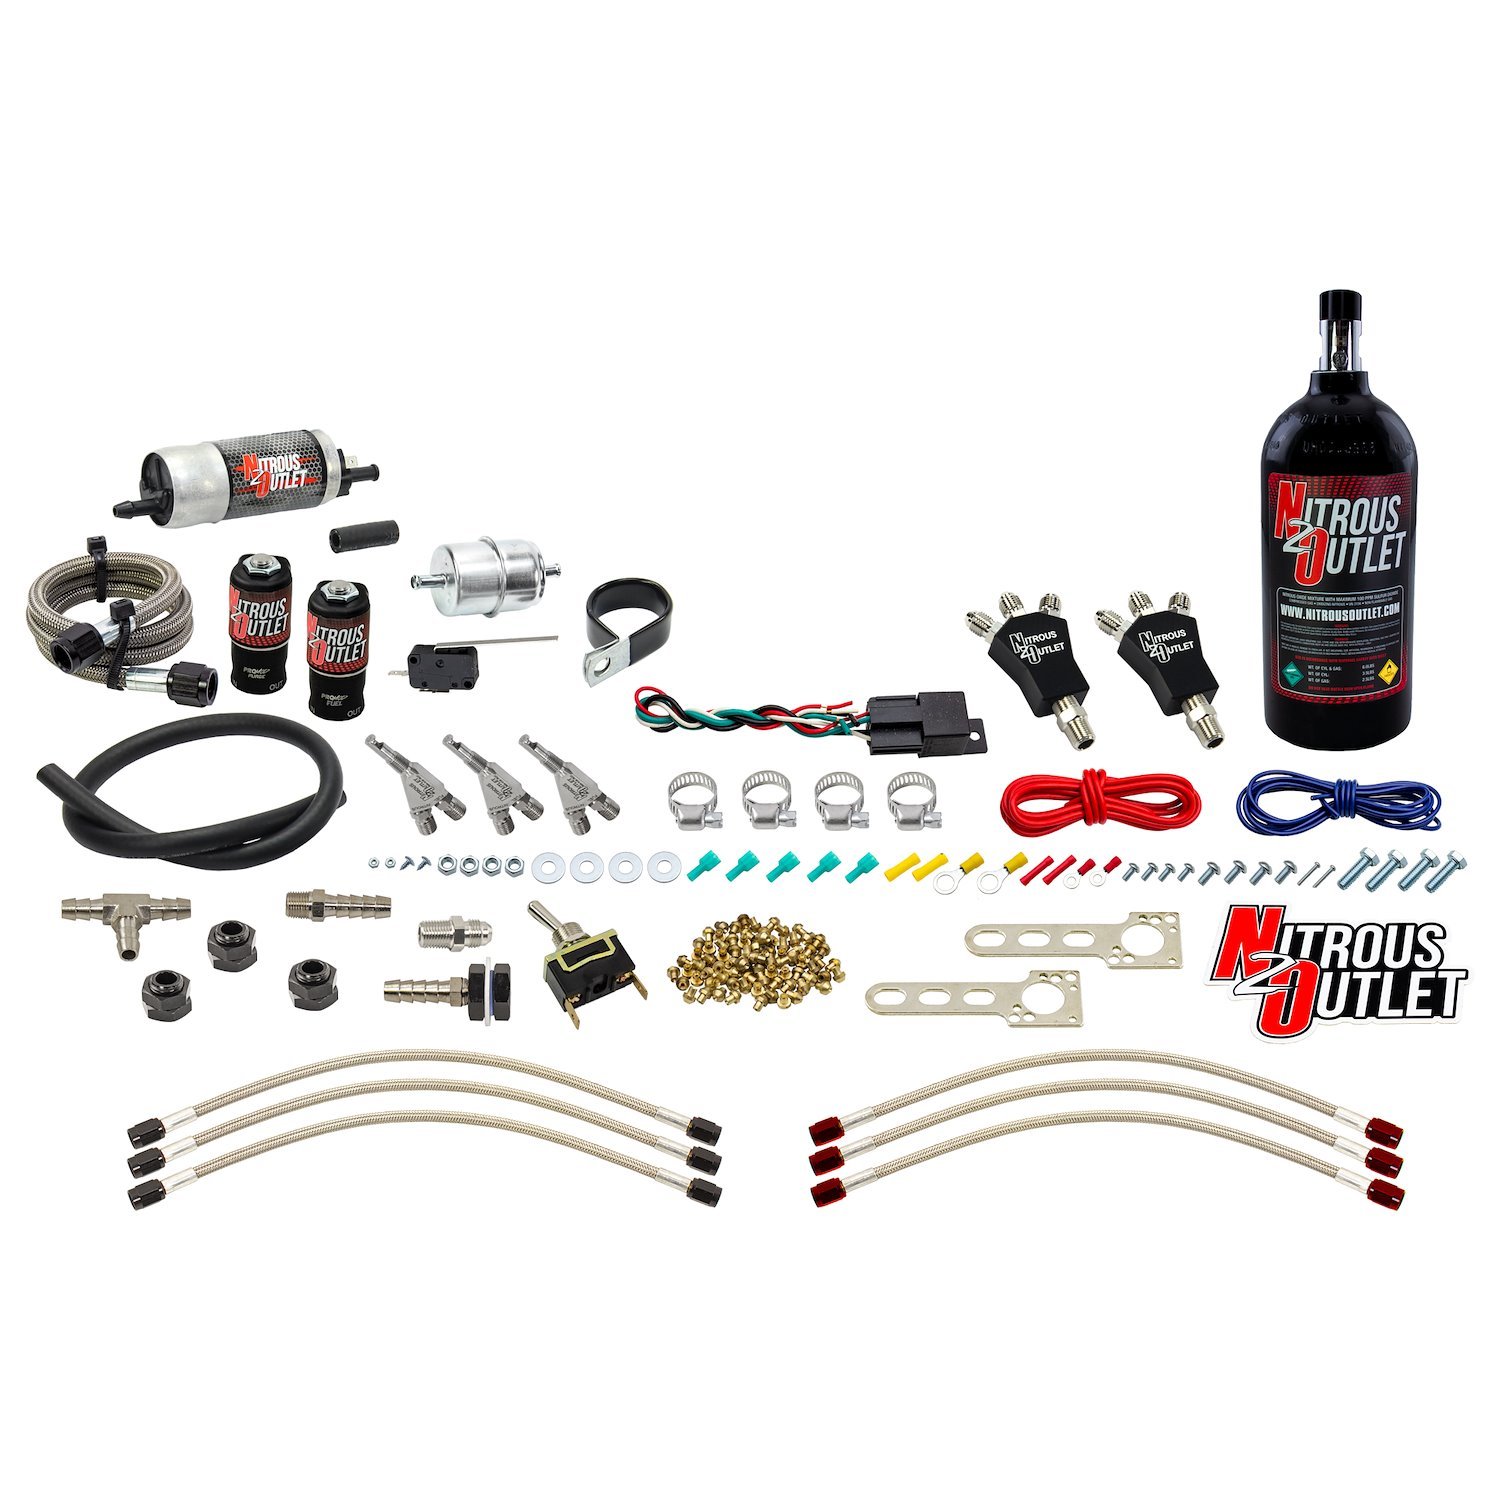 50-10032-2.5 Powersports 3-Cyl Wet Nozzle System, Stainless 90-Degree Nozzles, Gas, 6 psi, 3045607590 HP, 2.5LB Bottle